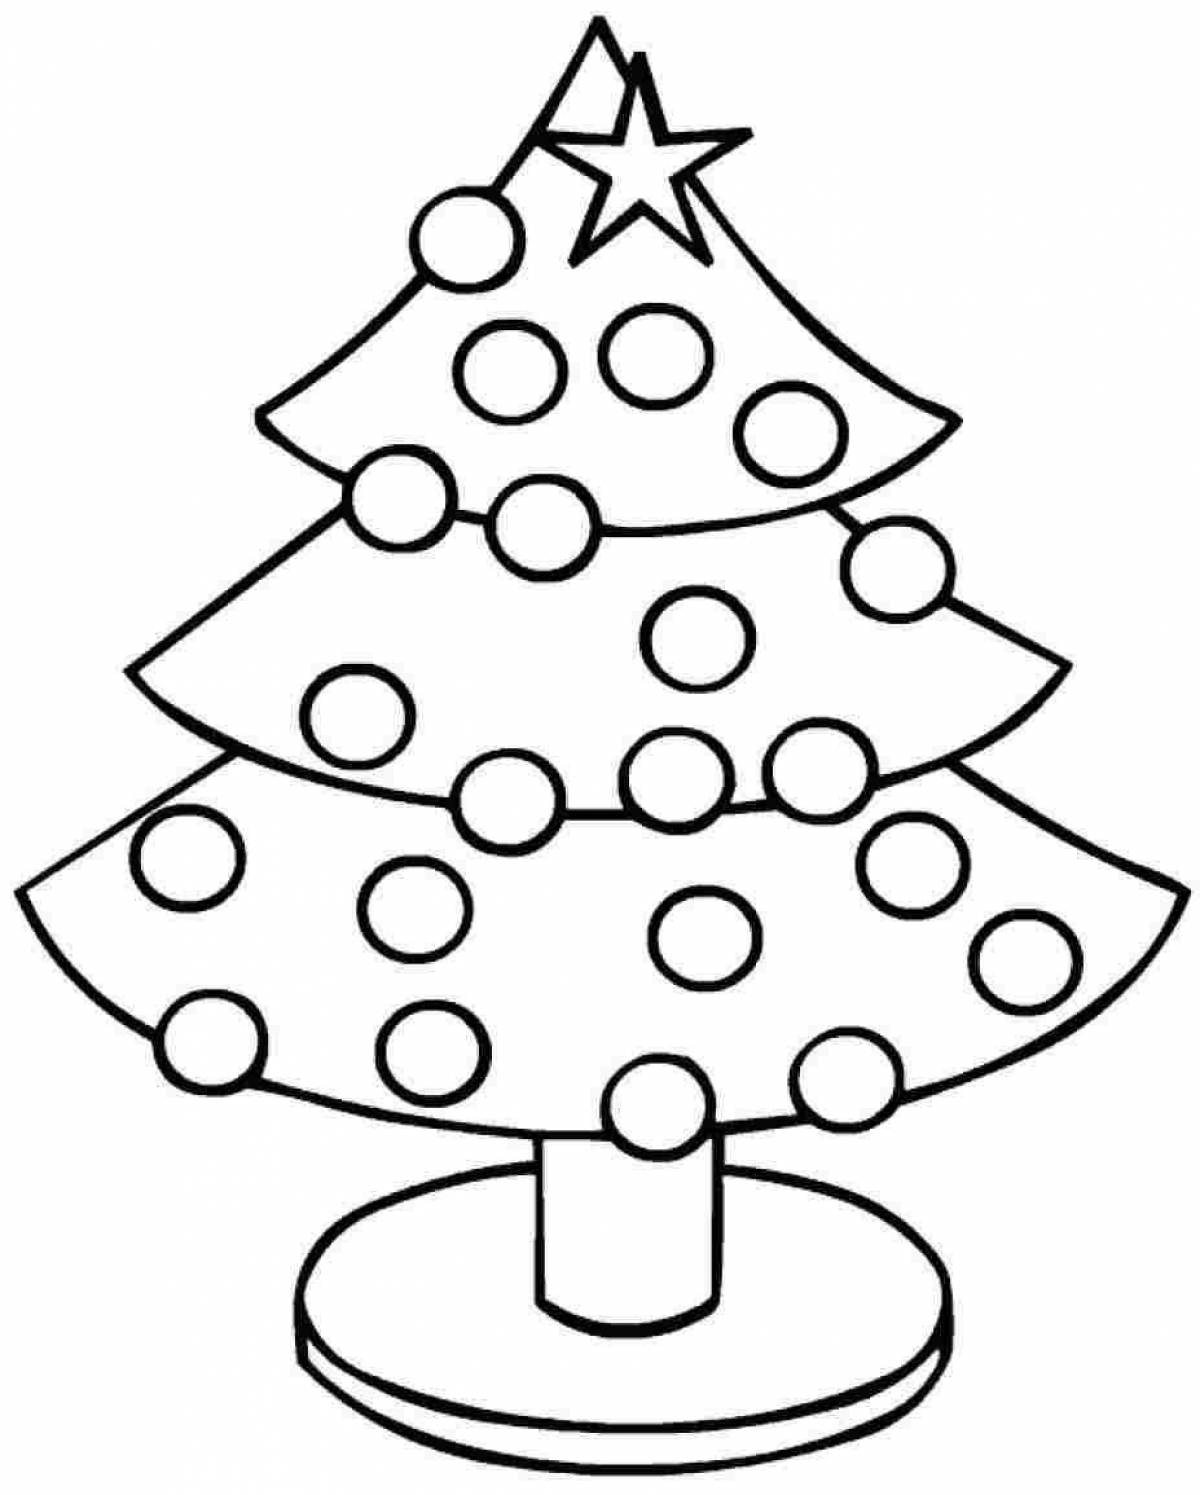 Glittering tree coloring page for 2-3 year olds